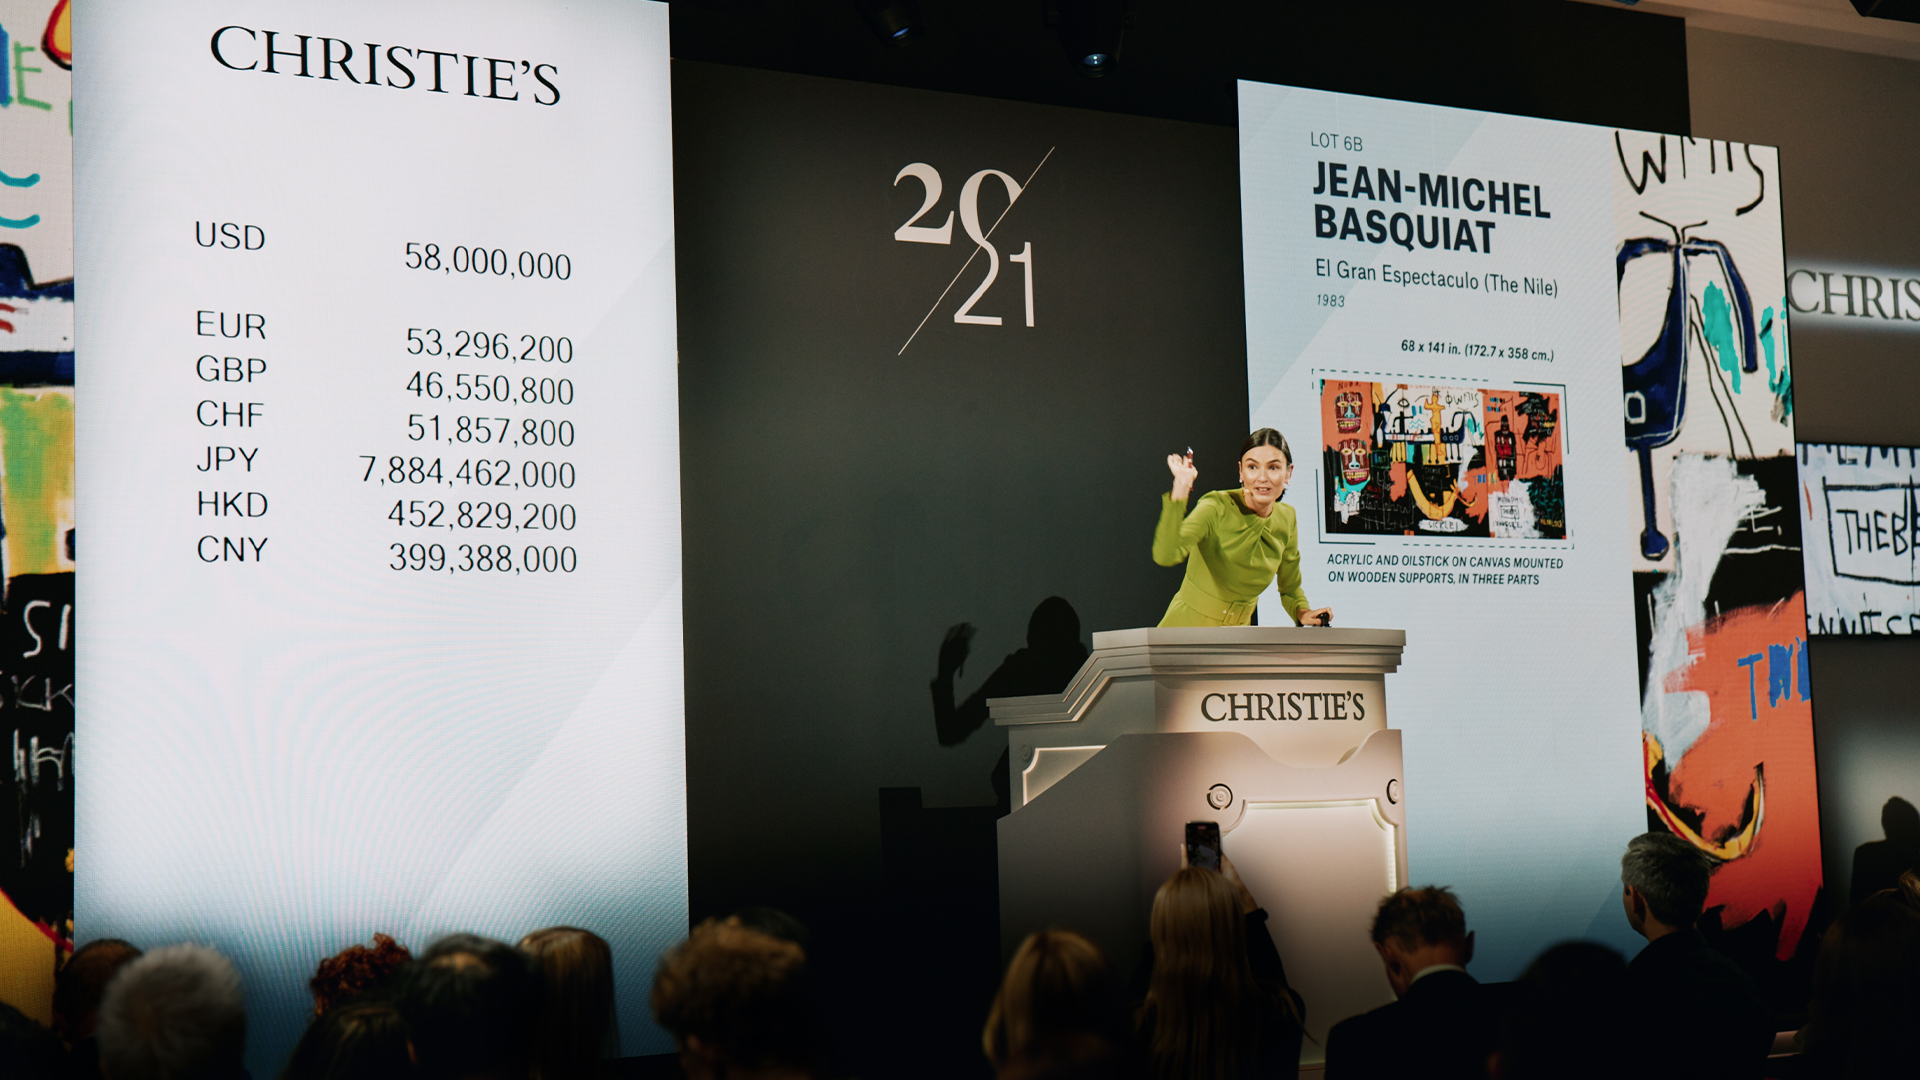 A woman in a green dress stands at a dais leading an auction with a large electronic display behind her.